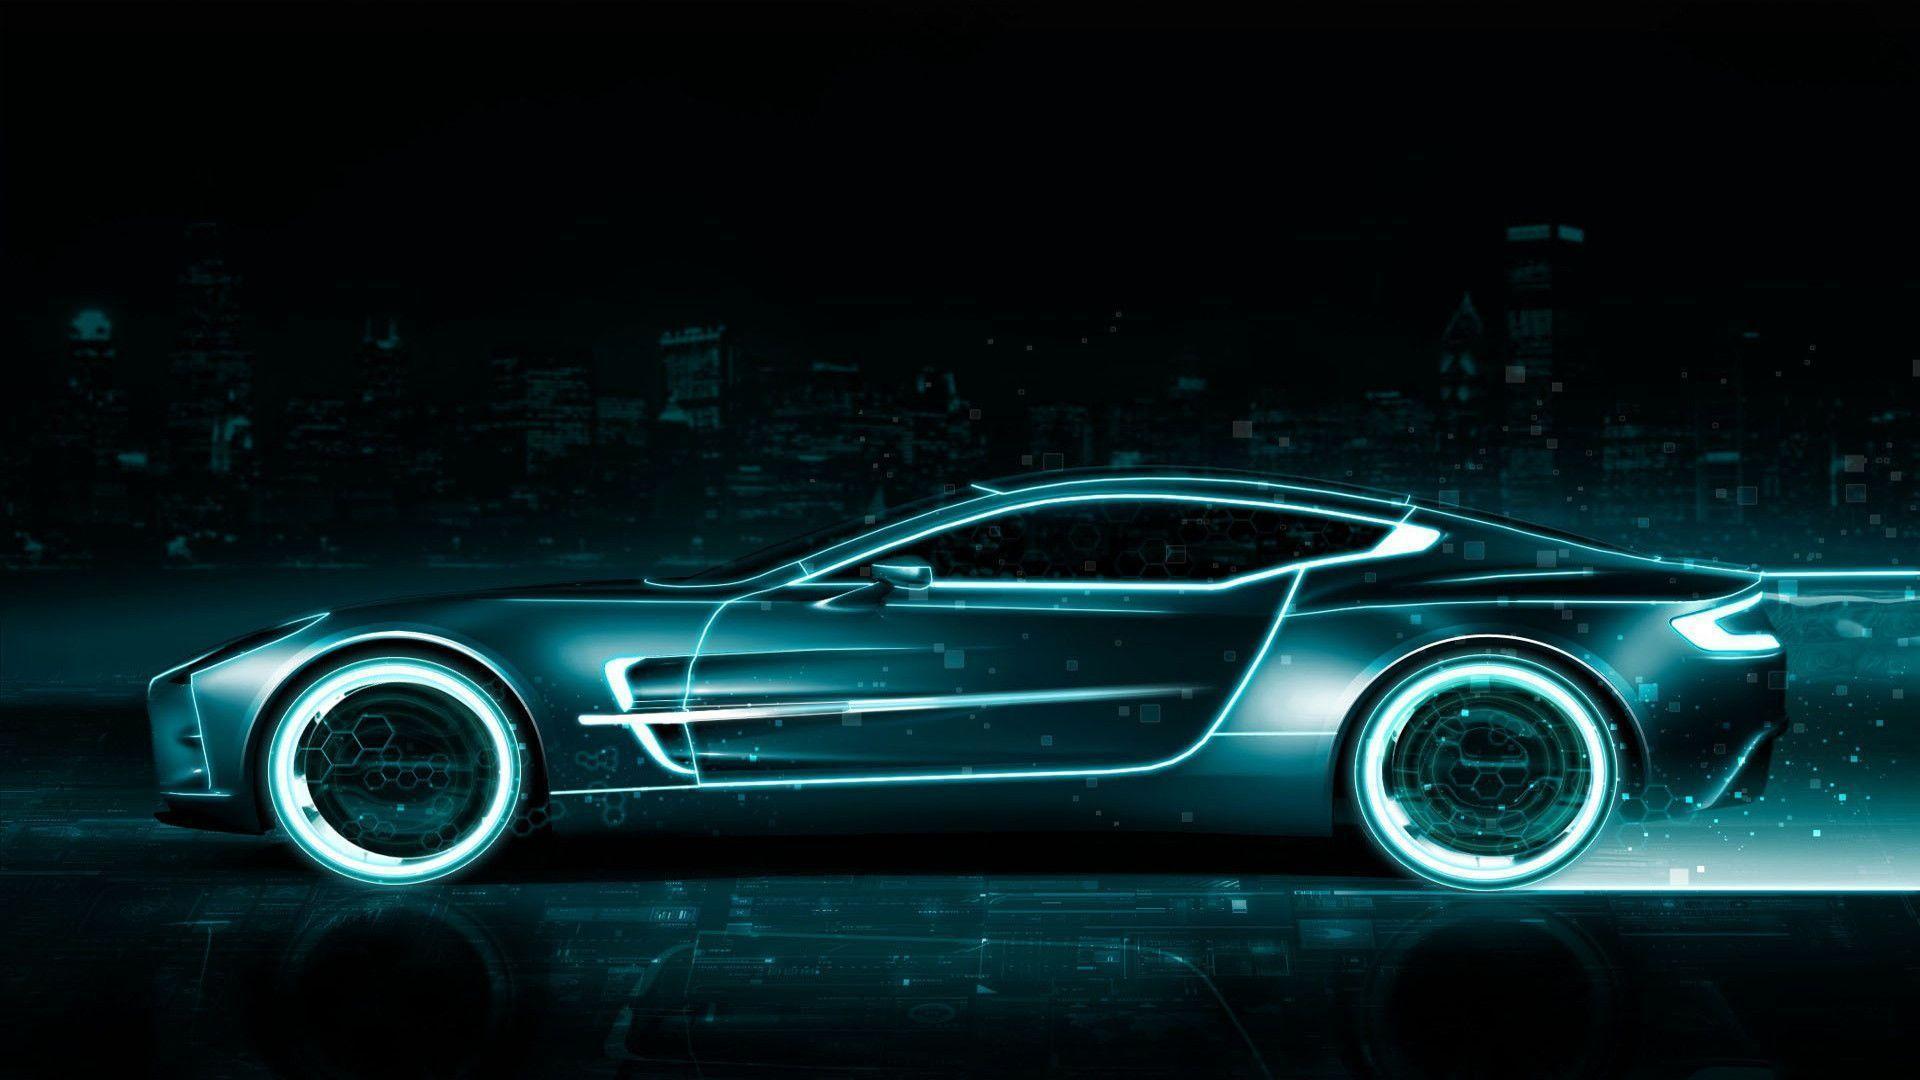 neon background cool cars Neon car wallpapers - HD 4K Cars Wallpapers